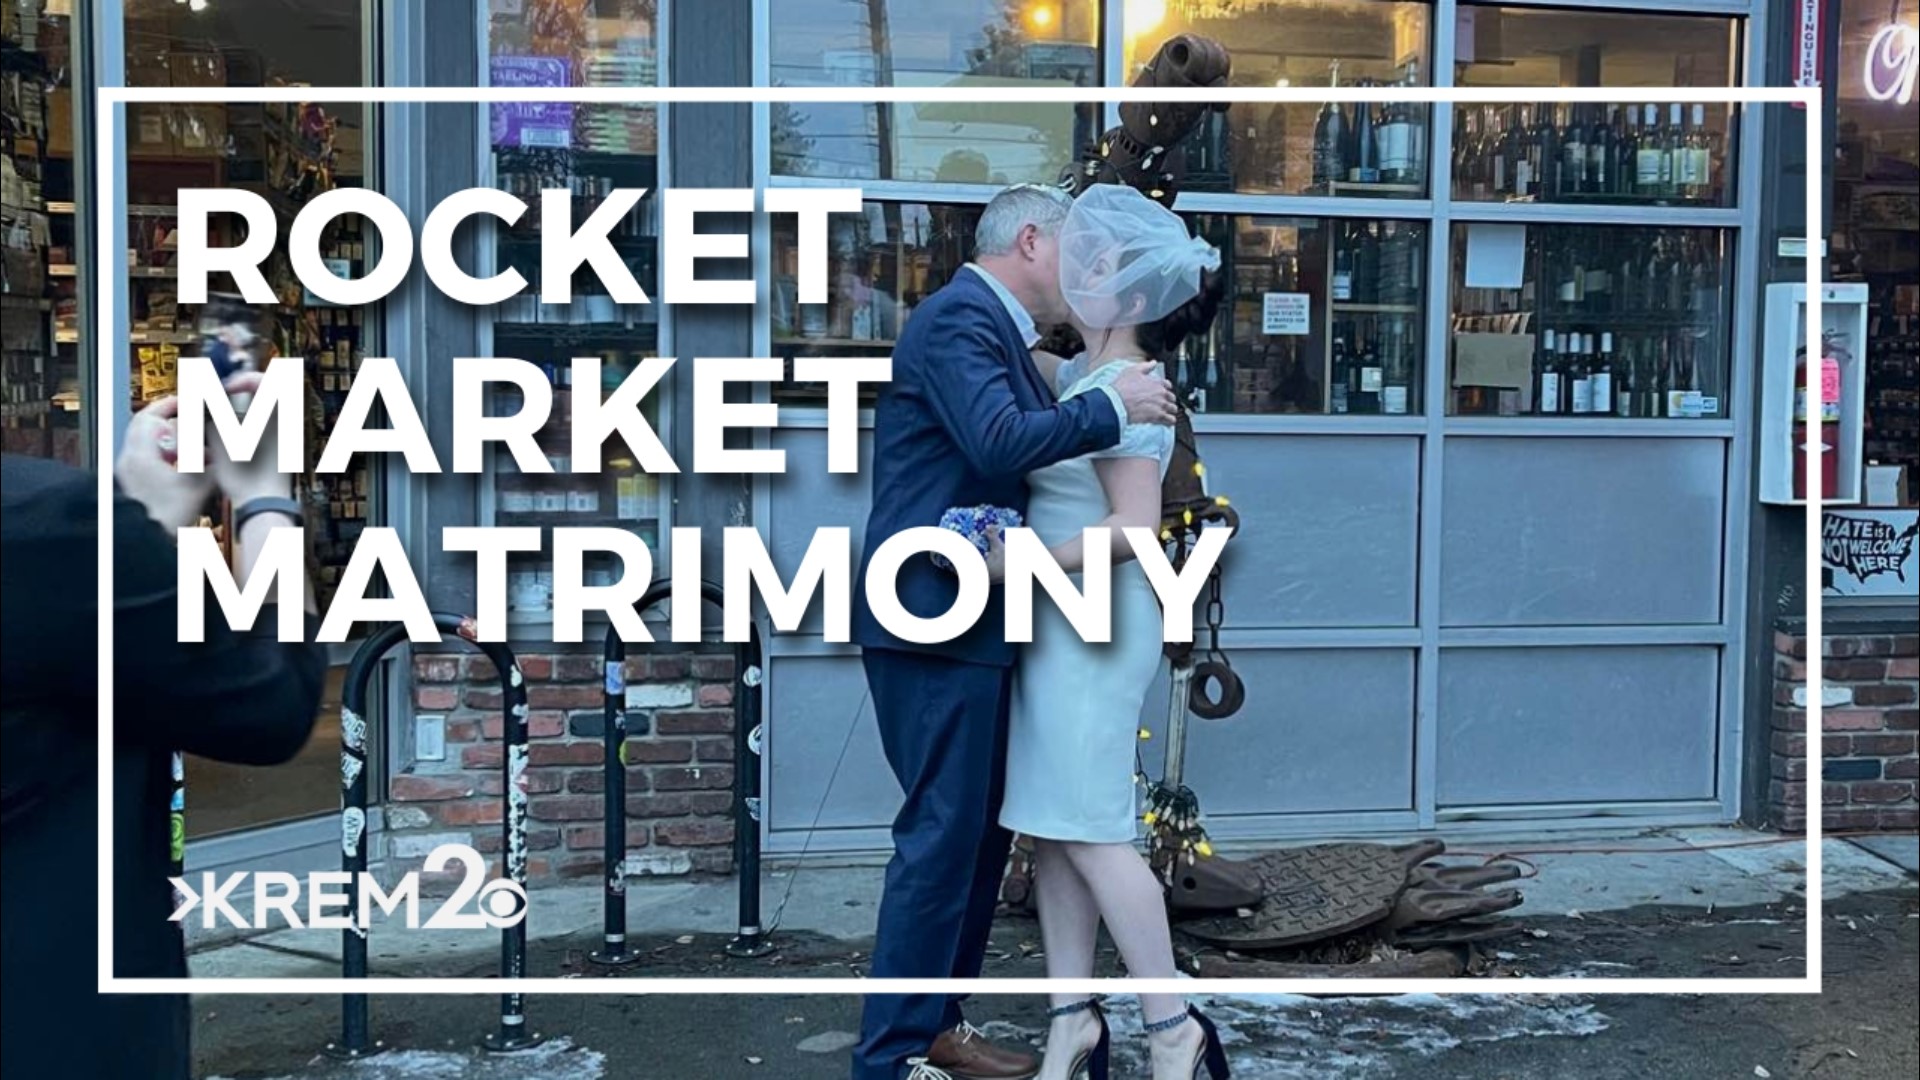 Tim and Lindsey McDermott wanted an intimate setting for their wedding ceremony, and what's more intimate than a small get-together at a local market?